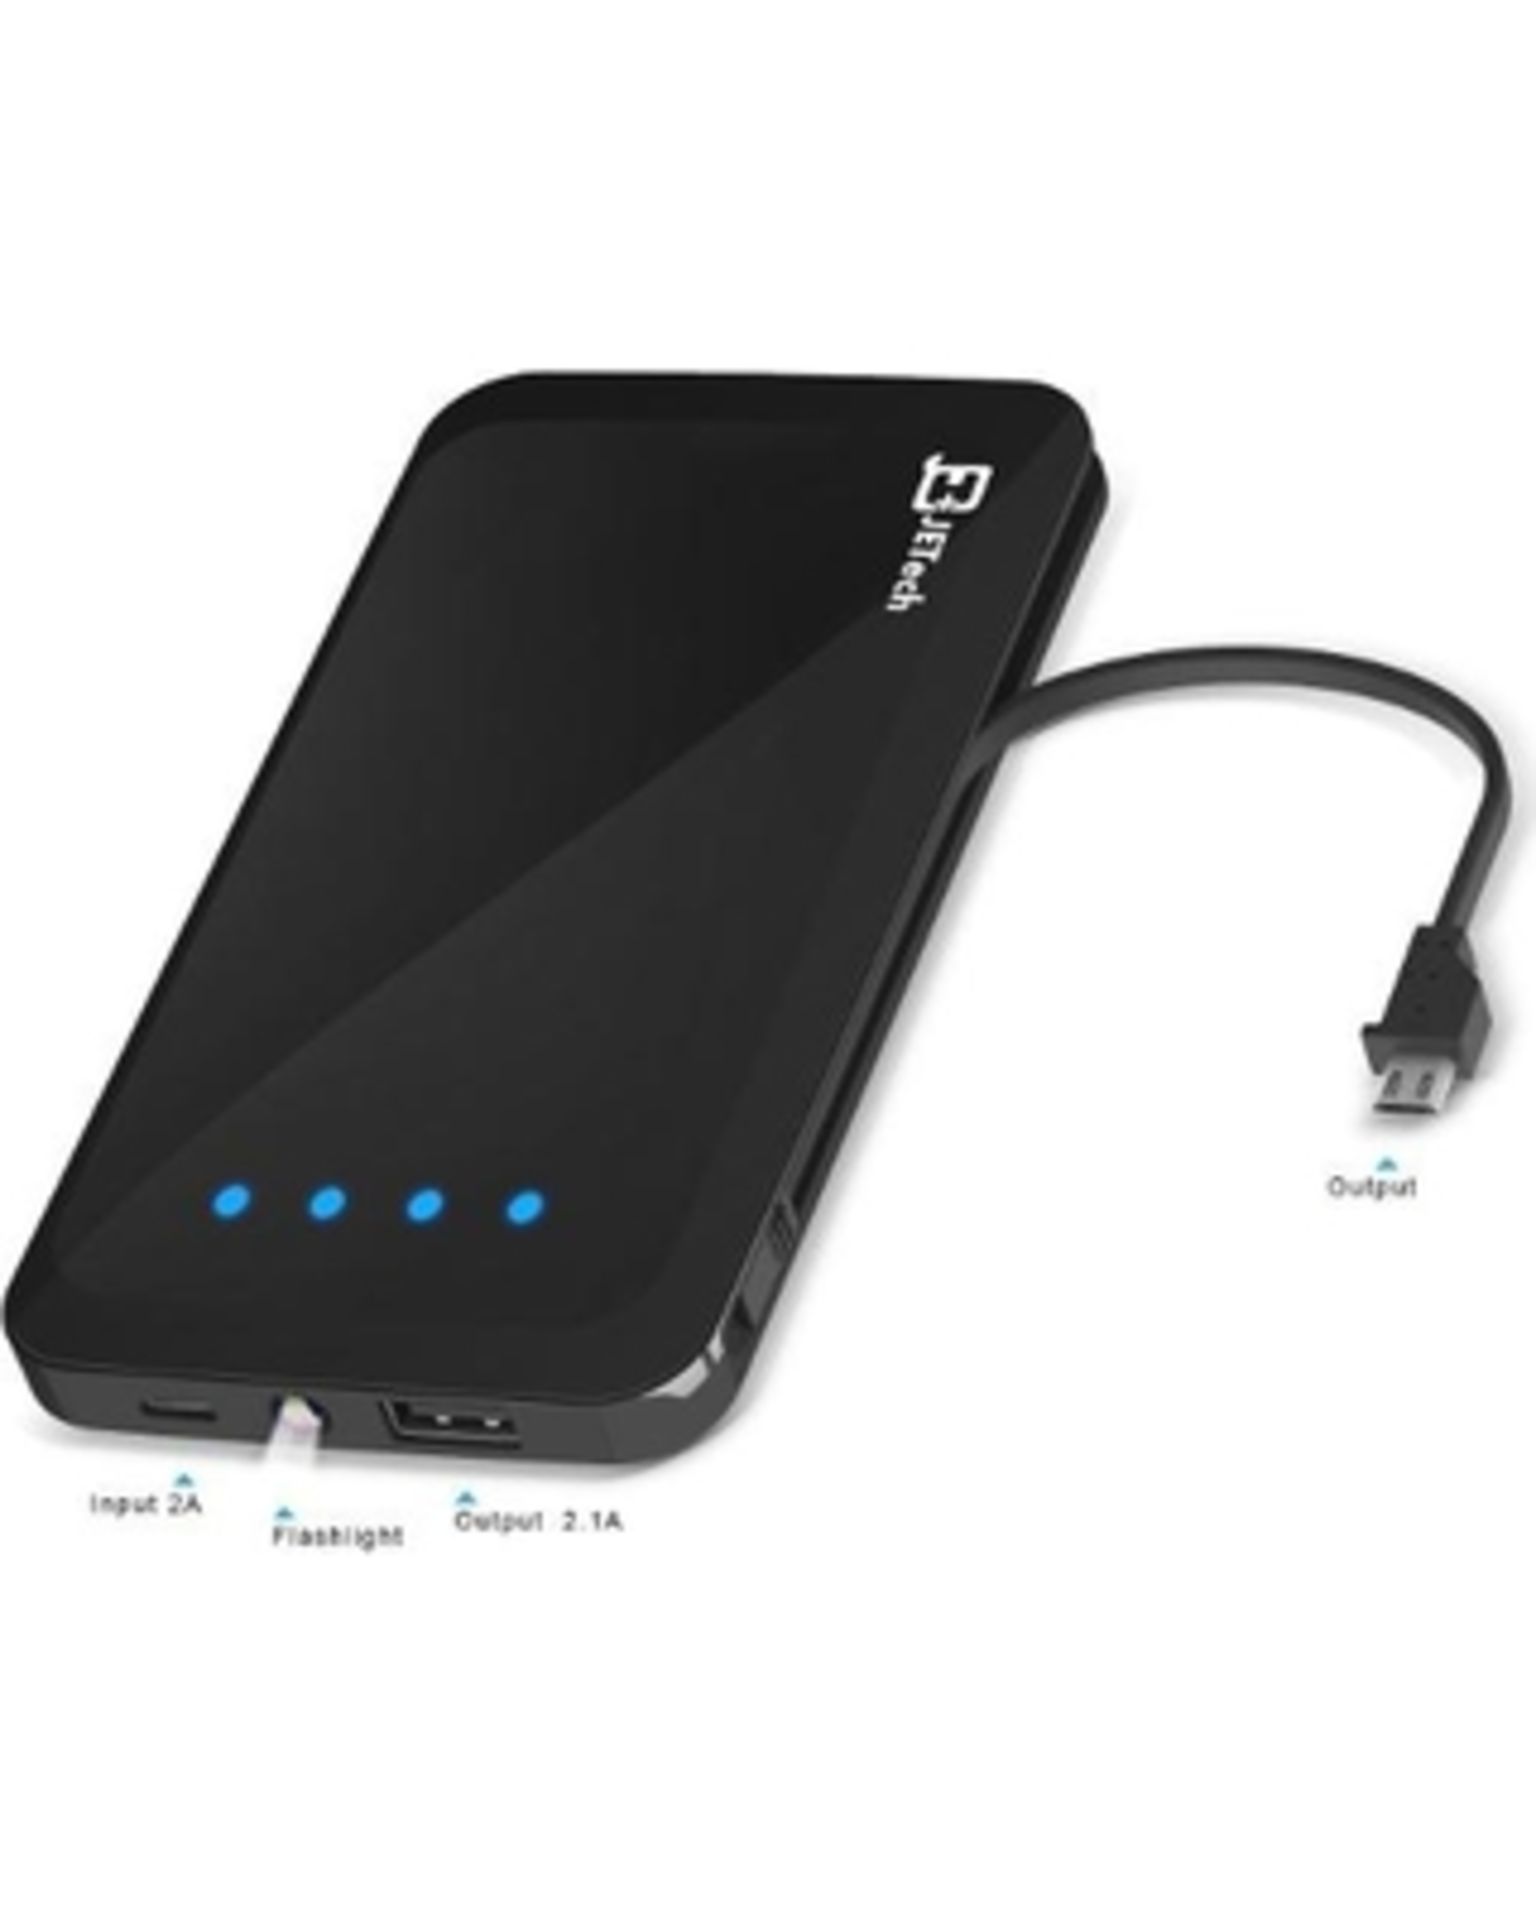 V Grade A 5000 mAh Power Bank With Built In Micro USB Cable - Black X 2 YOUR BID PRICE TO BE